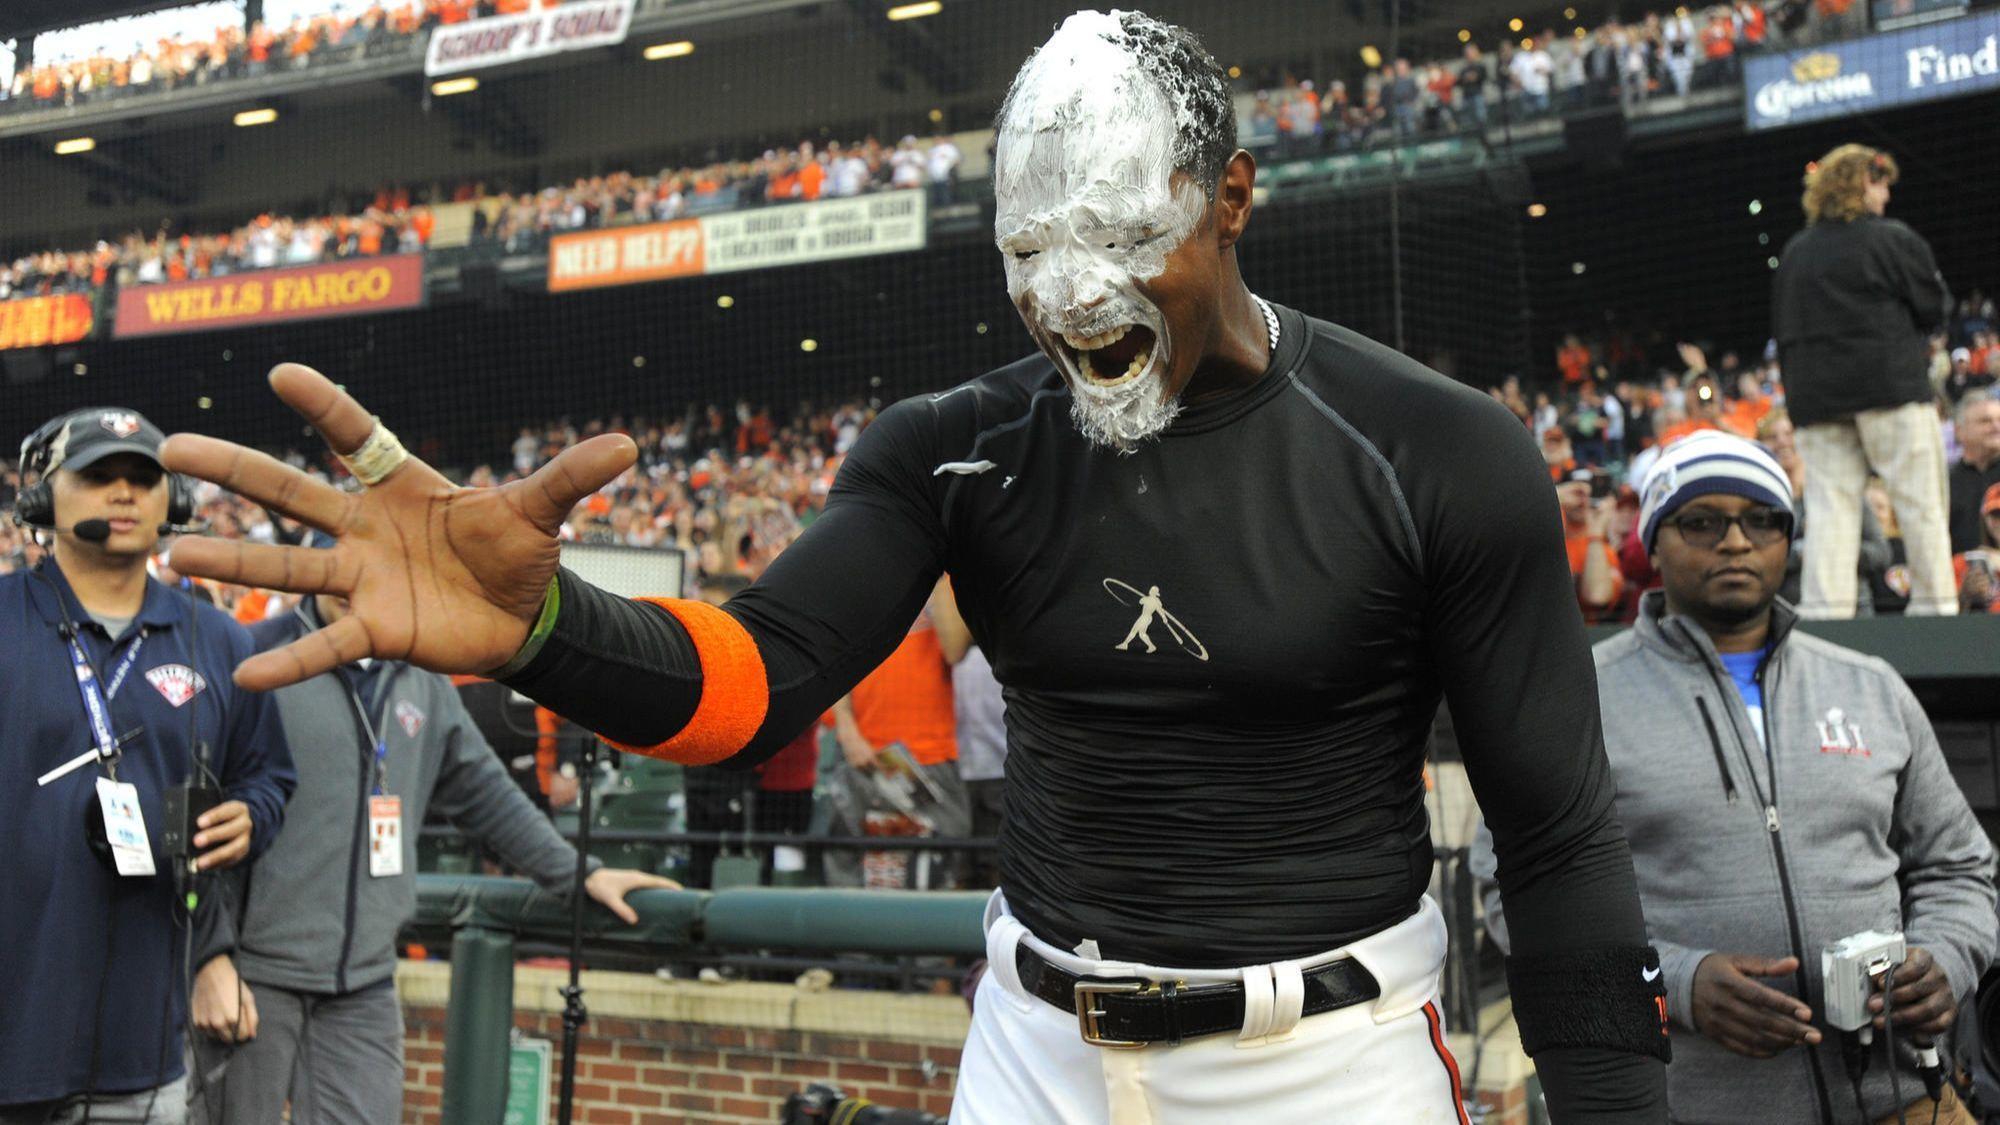 Schmuck Orioles' dramatic Opening Day victory delivers microcosm of